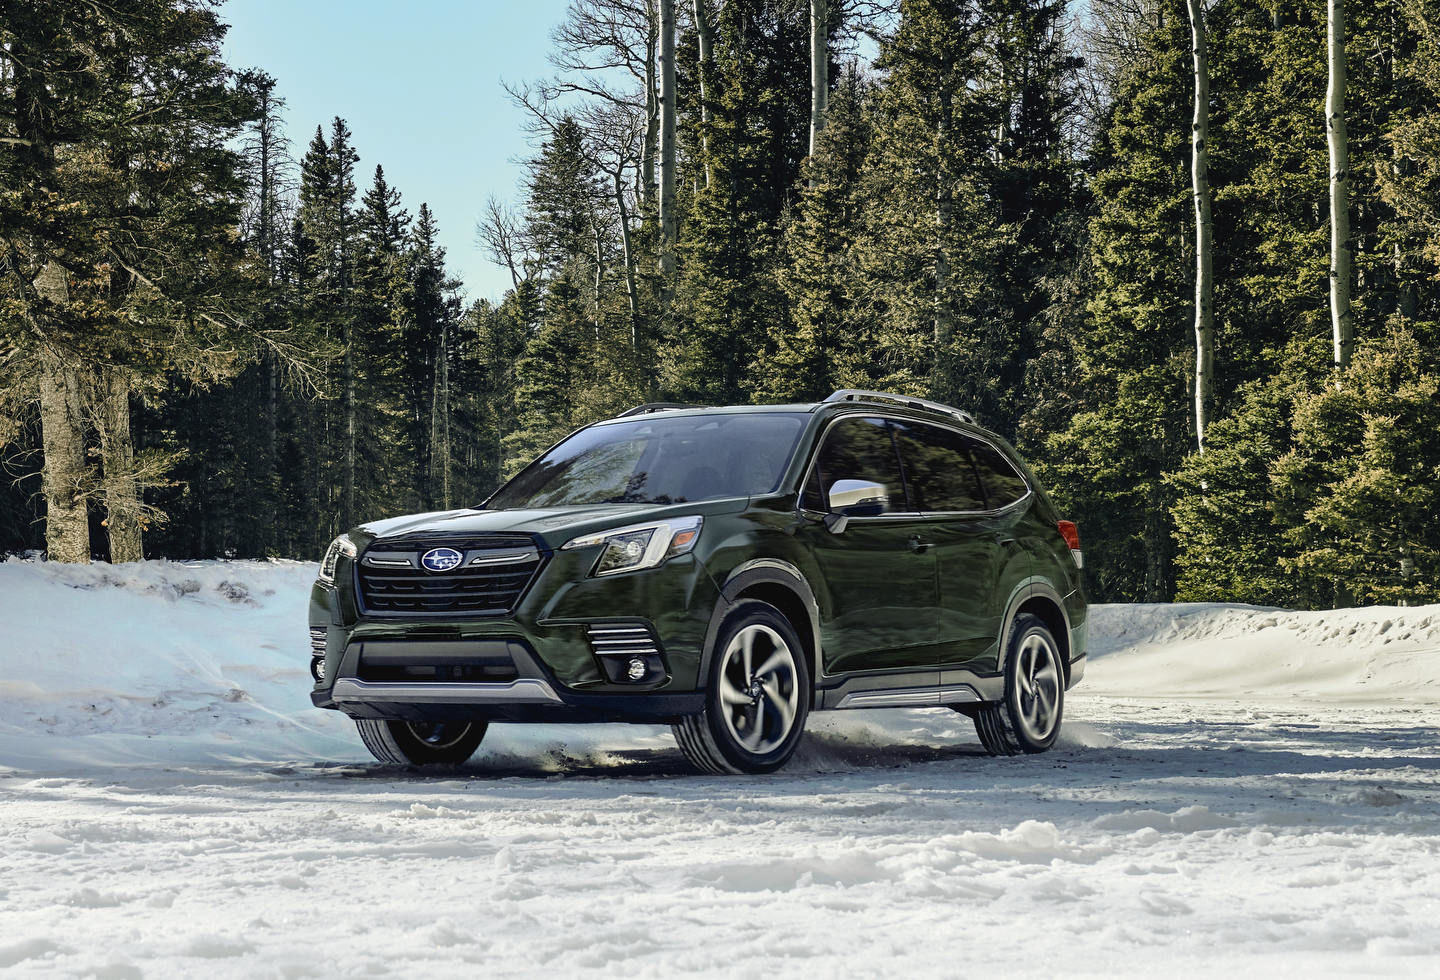 What to expect from the 2023 Subaru Forester?